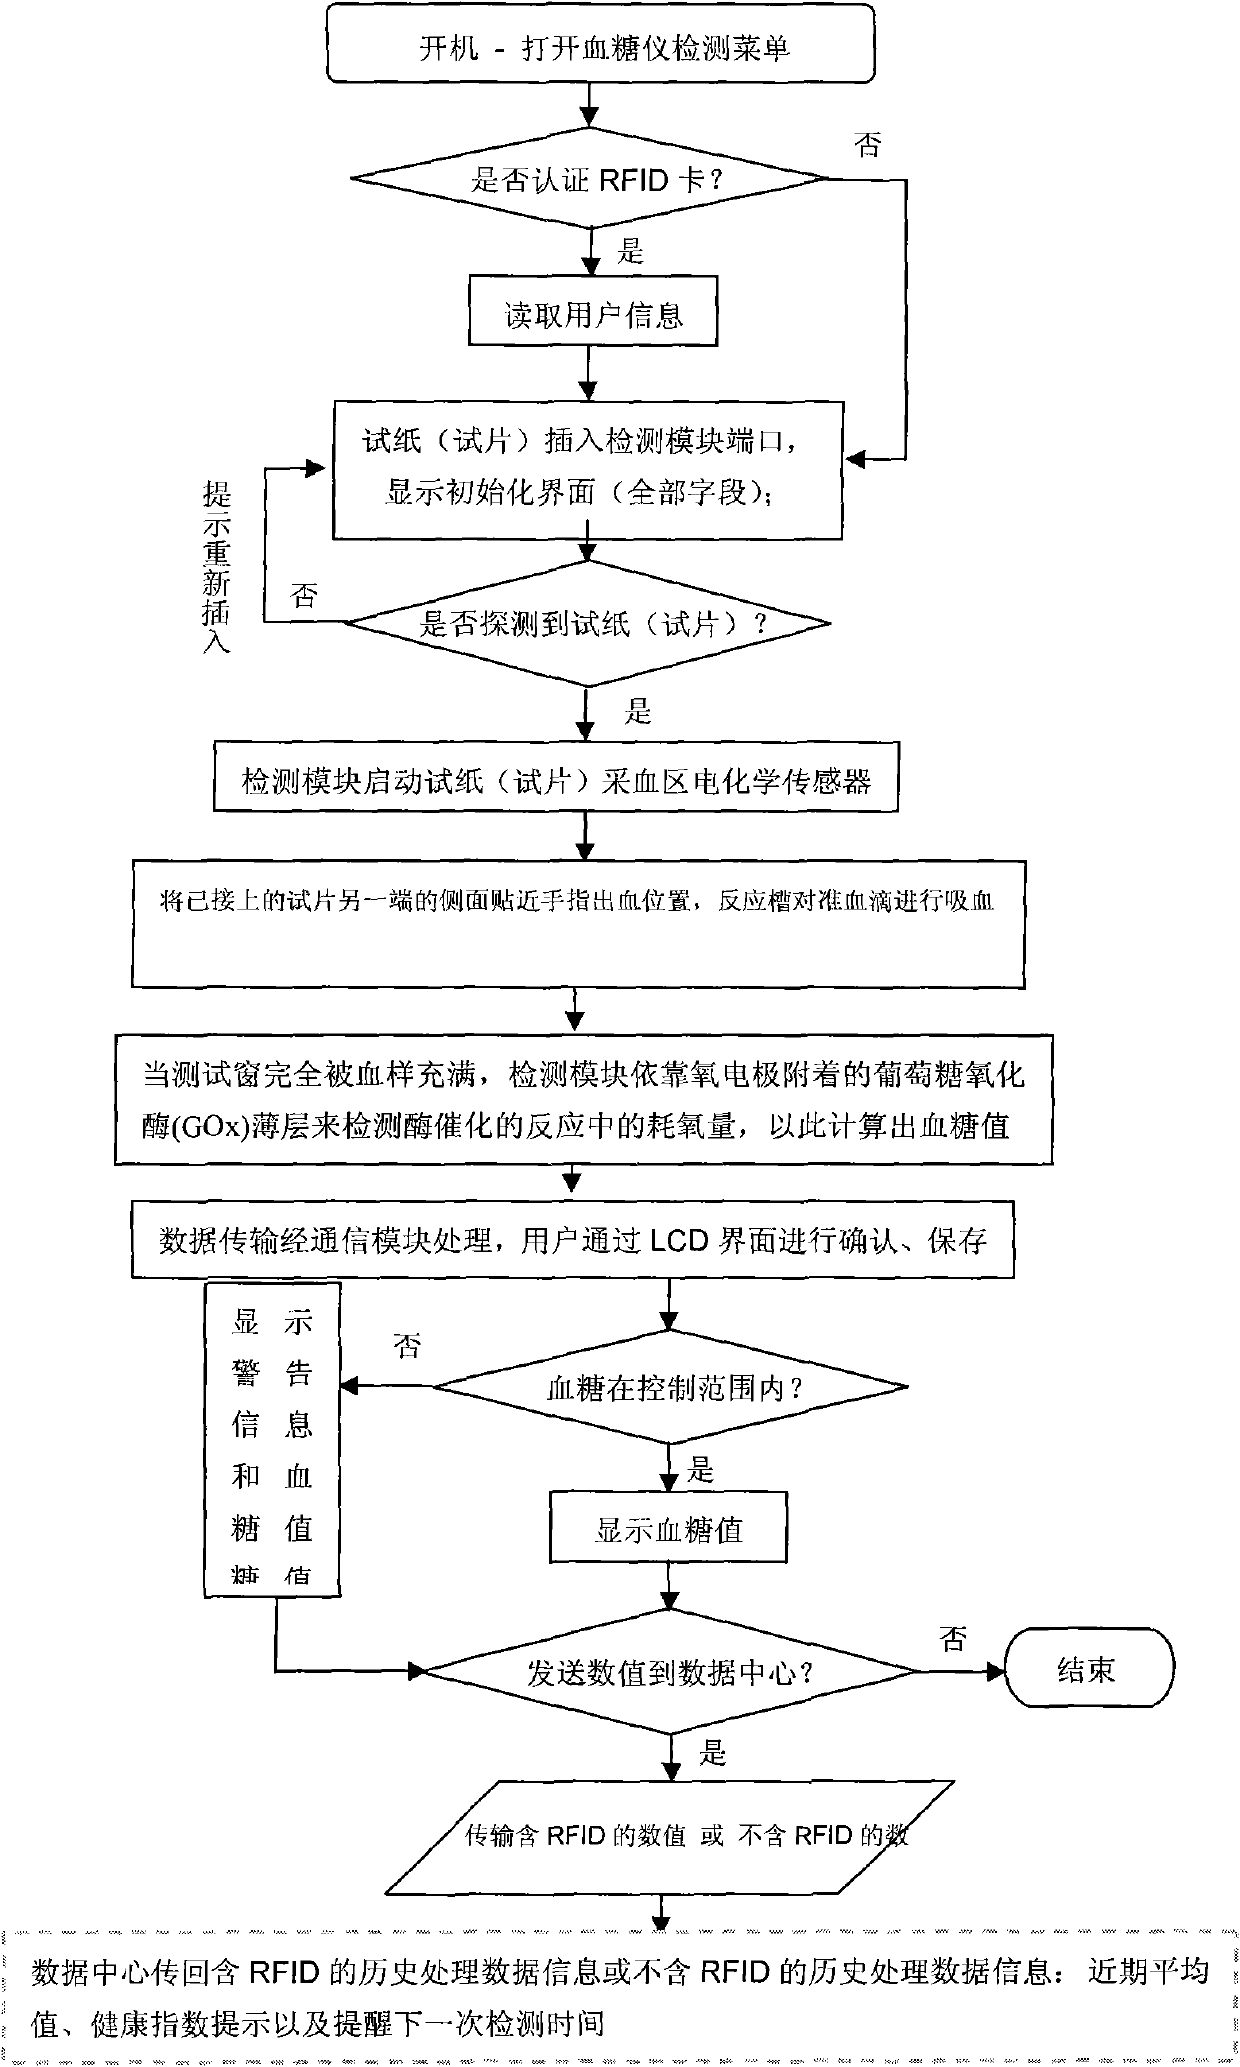 Interactive portable communication apparatus with function of blood sugar real-time monitoring and blood sugar monitoring method